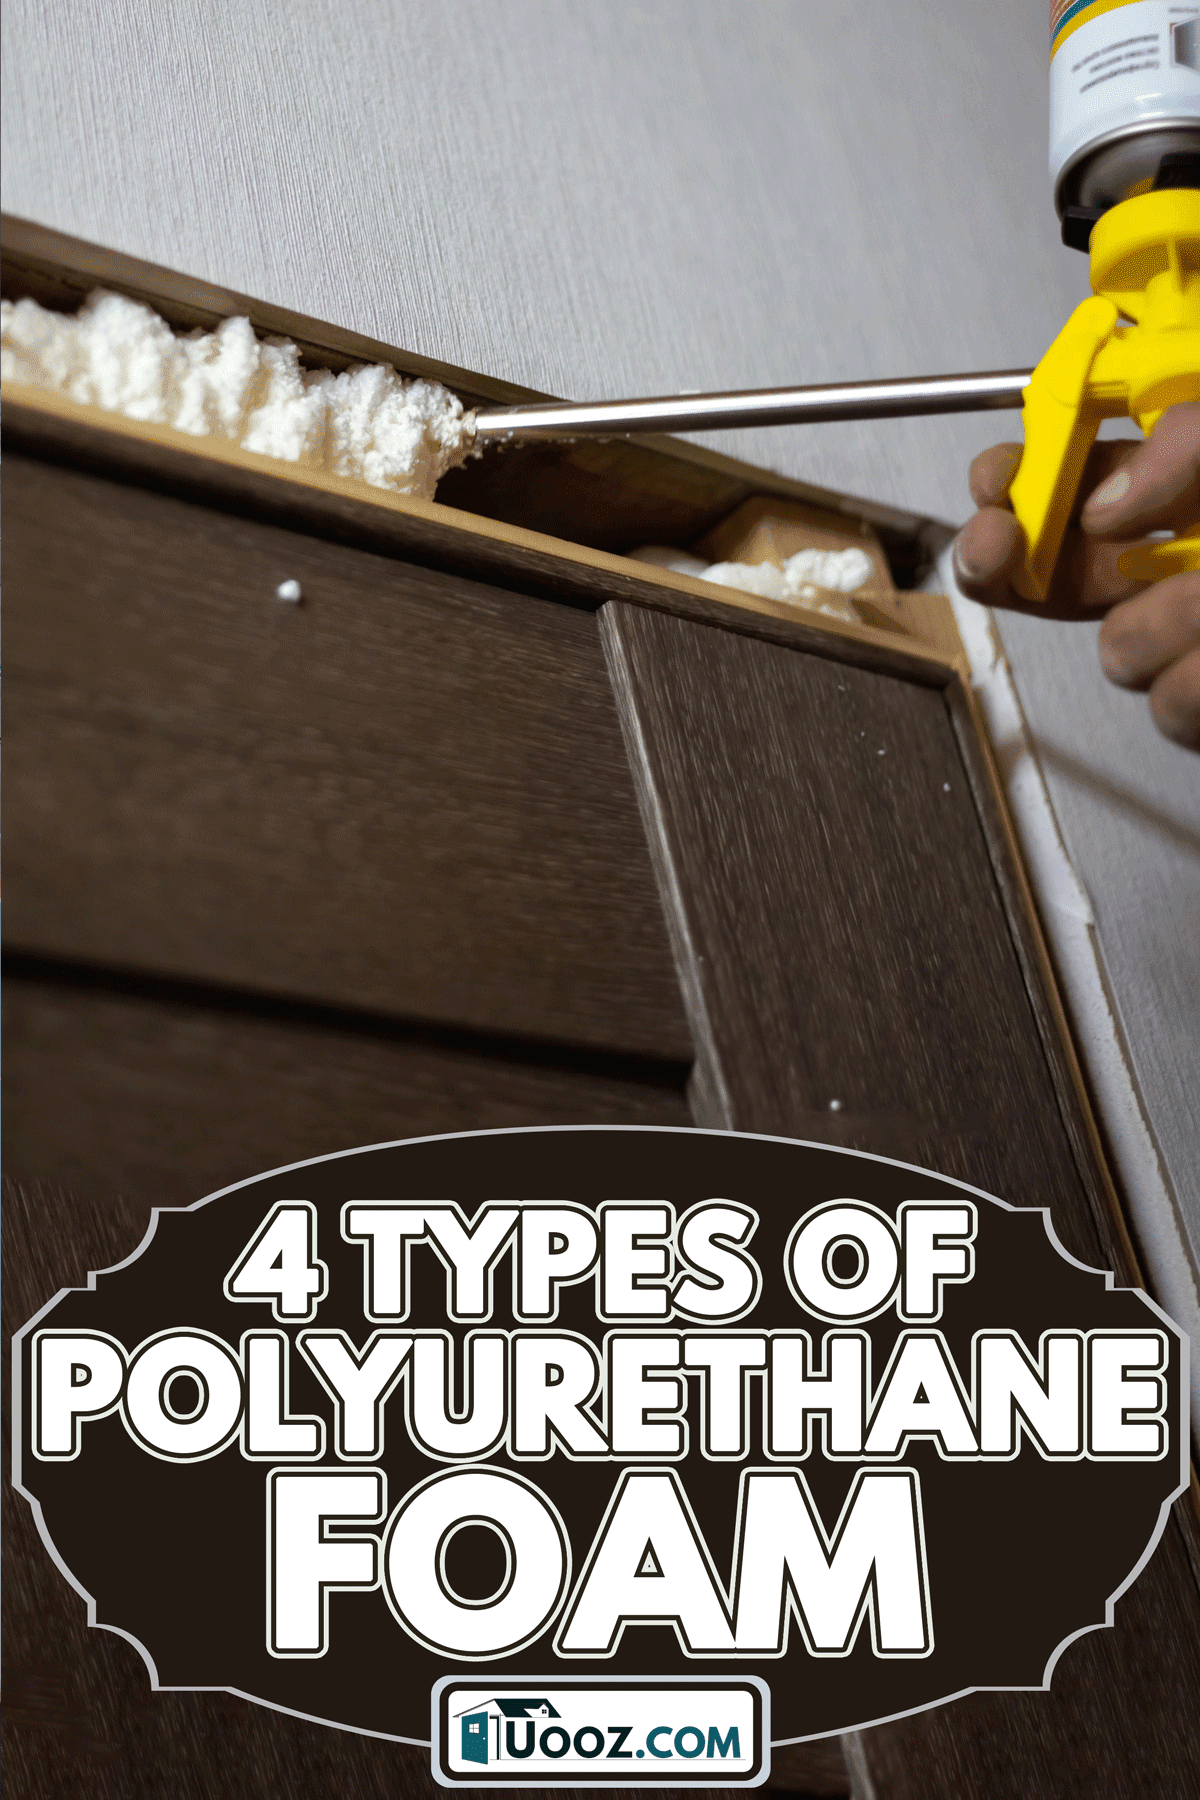 Man foams up the gaps between the door and the wall with polyurethane foam, 4 Types Of Polyurethane Foam